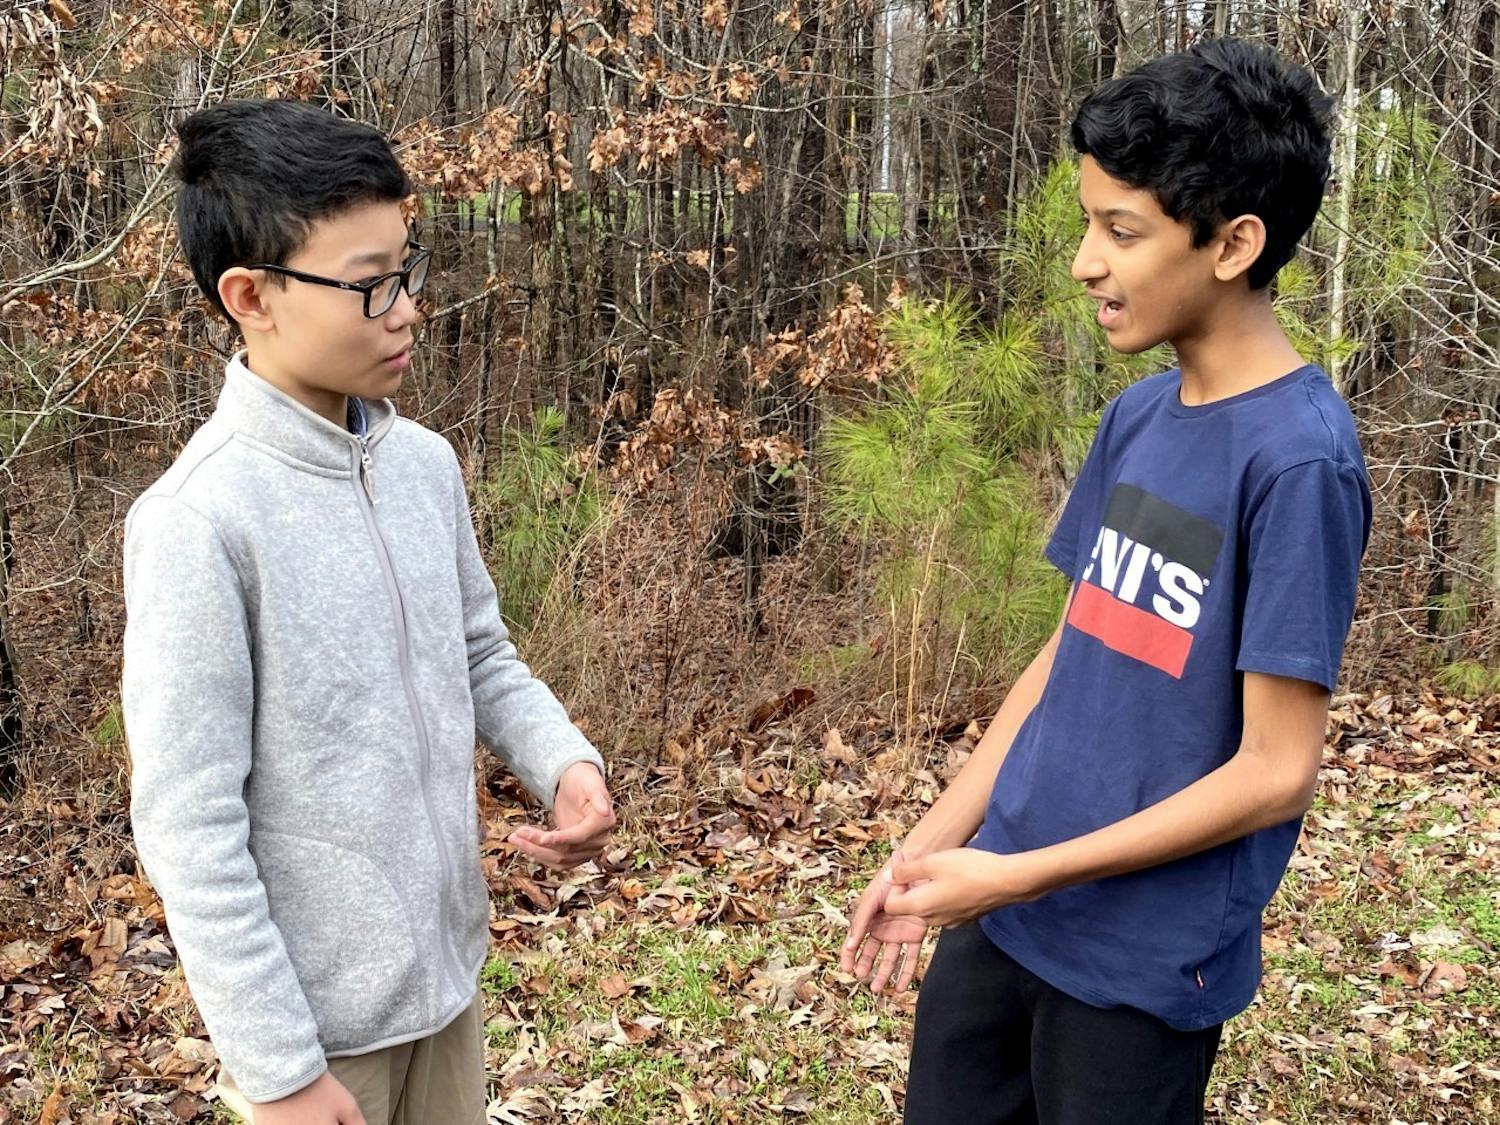 (From left) Gulinky Lu and Arul Nagarajan are two of the three eighth-graders who will perform their poetry on Jan. 19, 2020 for the Emerging Diverse Voices in Orange County performance series. Photo courtesy of Kim Lane.&nbsp;
&nbsp;